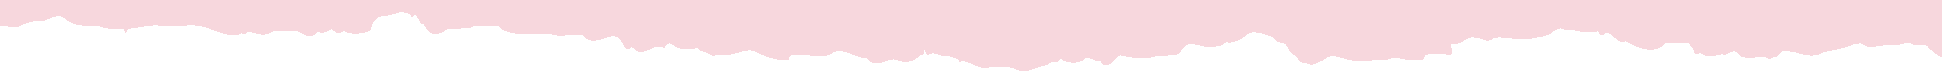 Footer Rowbckgd-Bottom - Pink.png